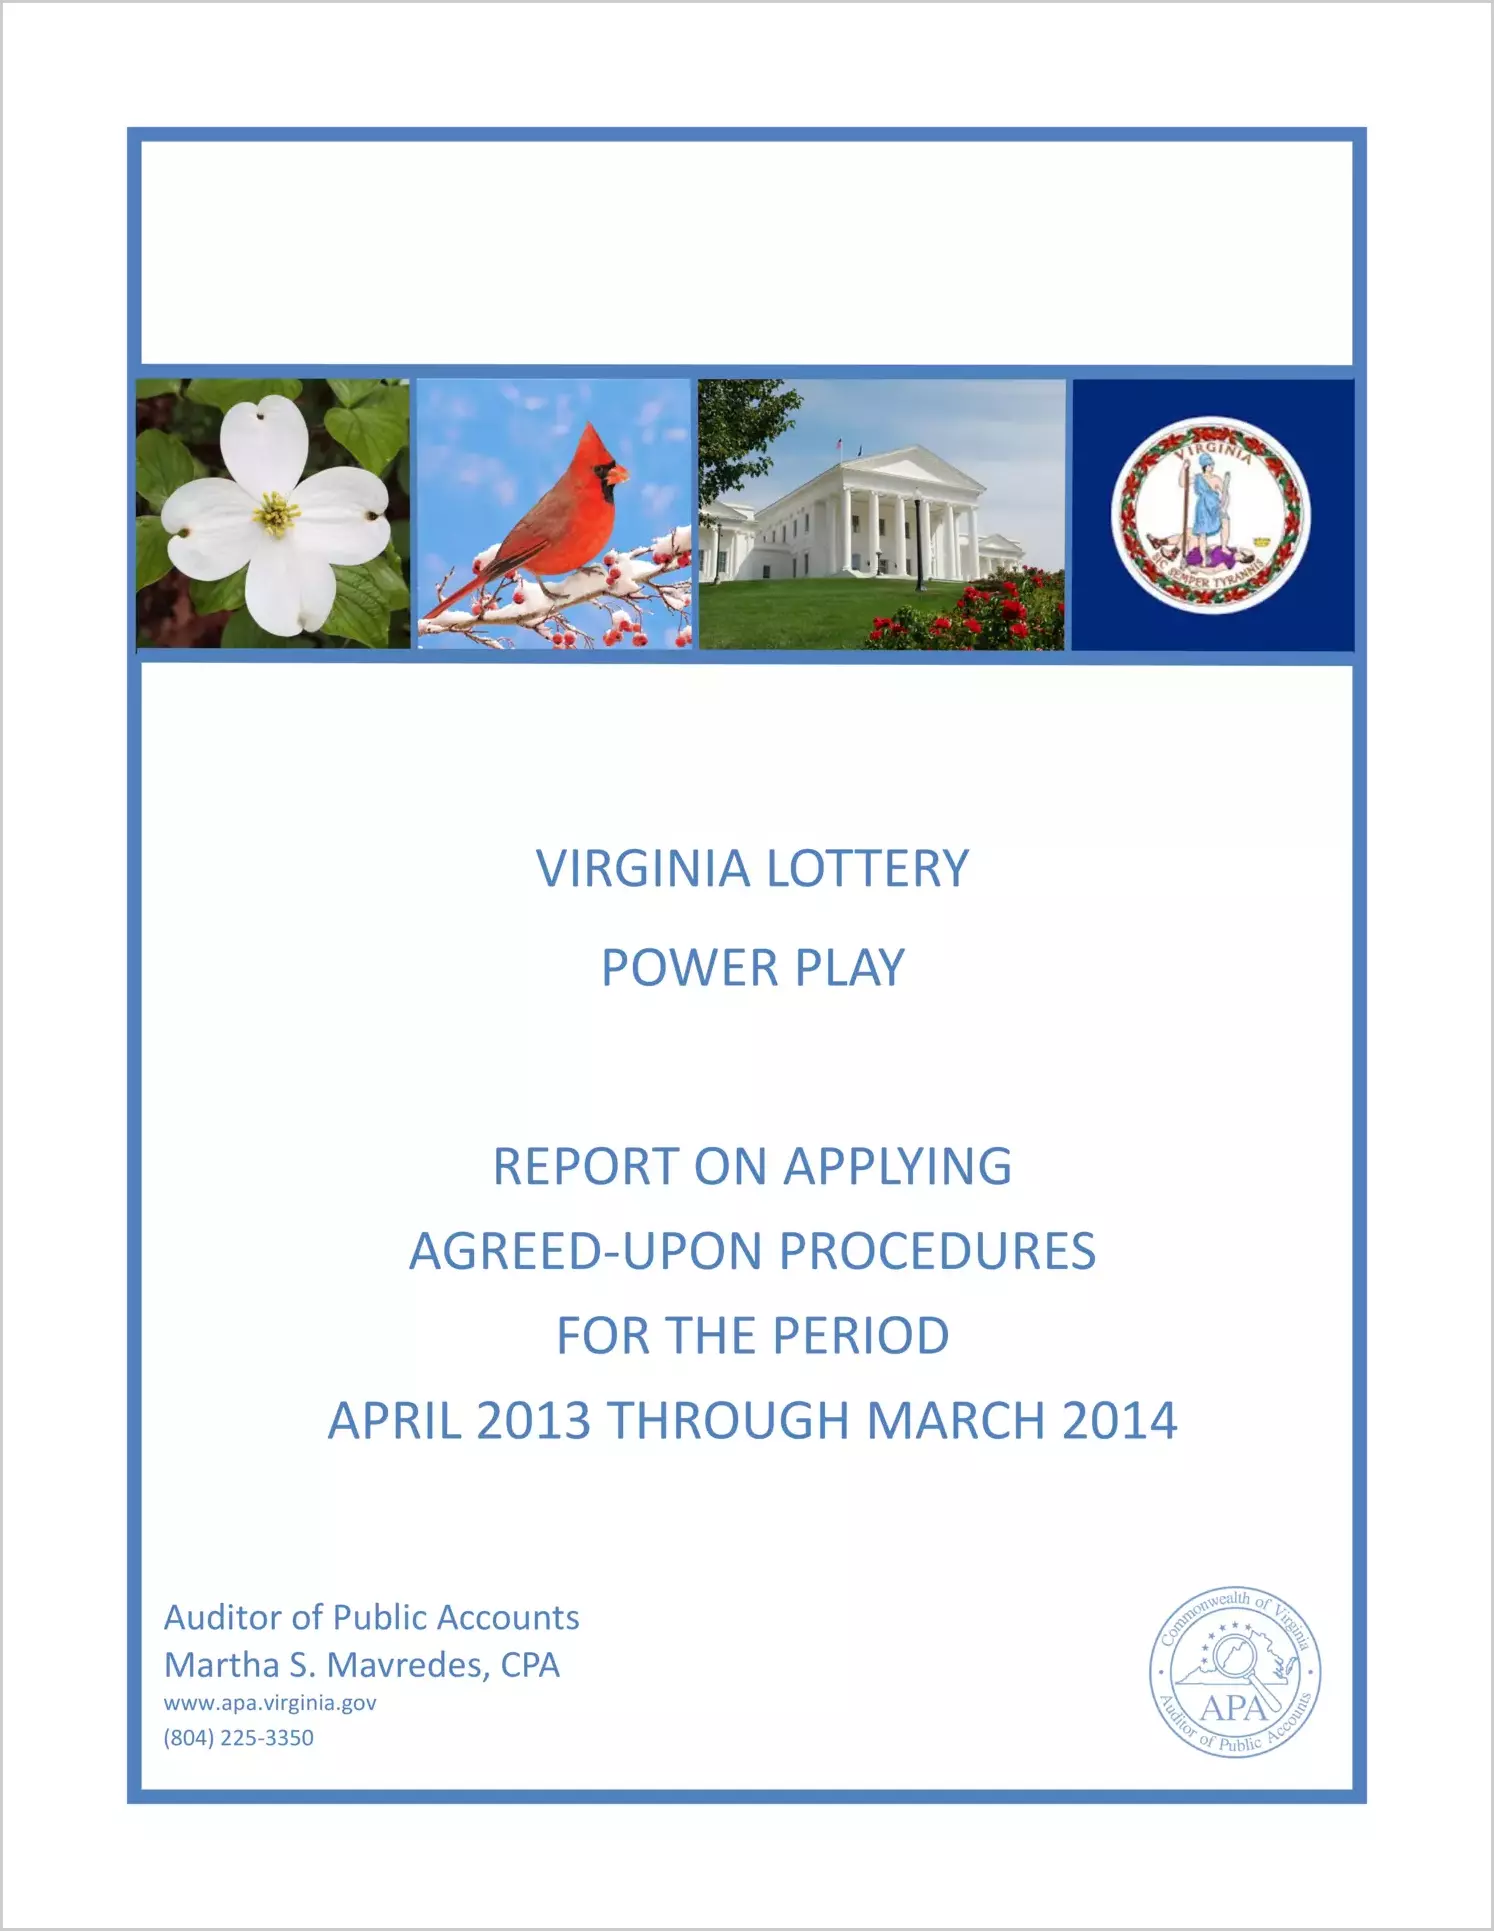 VA Lottery Power Play report on Applying Agreed-Upon Procedures for the period April, 2013 through March, 2014